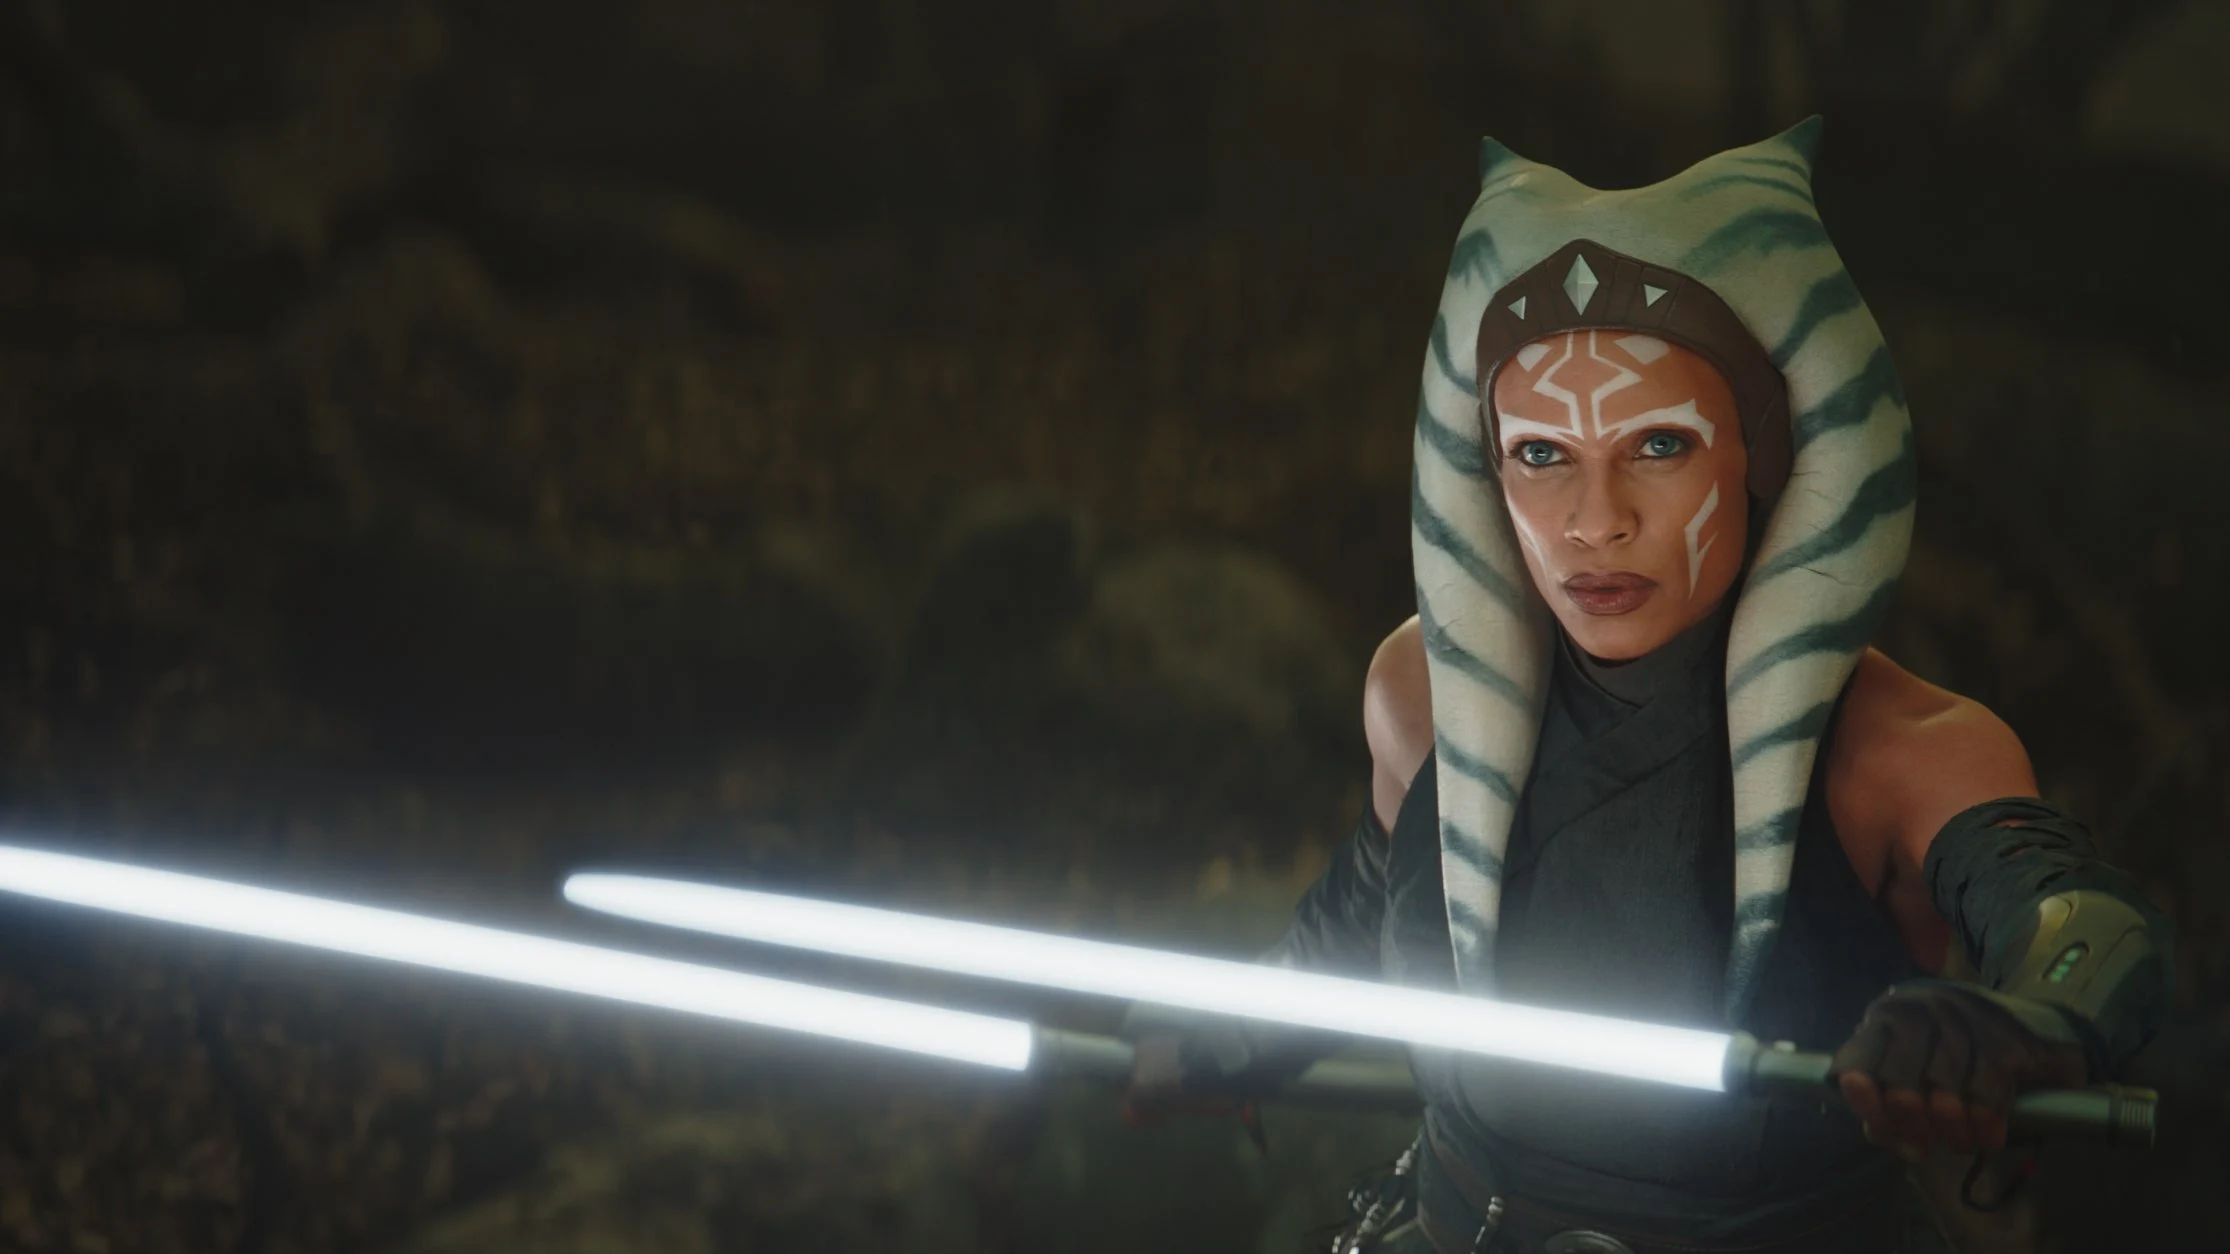 The series Ahsoka was announced in December 2020 by Lucasfilm.